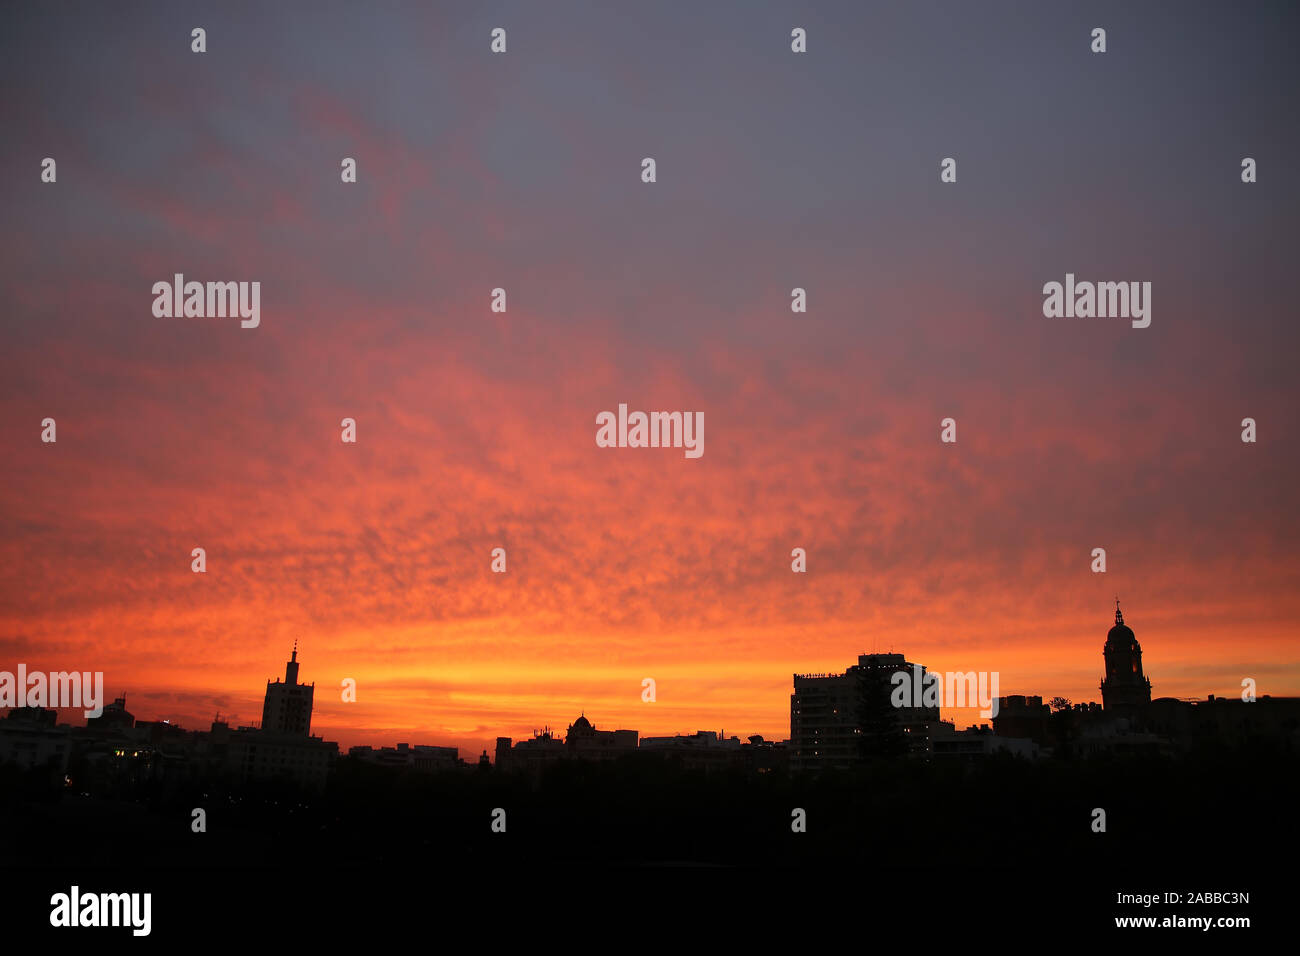 Beautiful colourful sunset sky over the skyline & rooftops of the city, with the buildings as silhouette, Malaga,  Andalusia, Southern Spain. Stock Photo